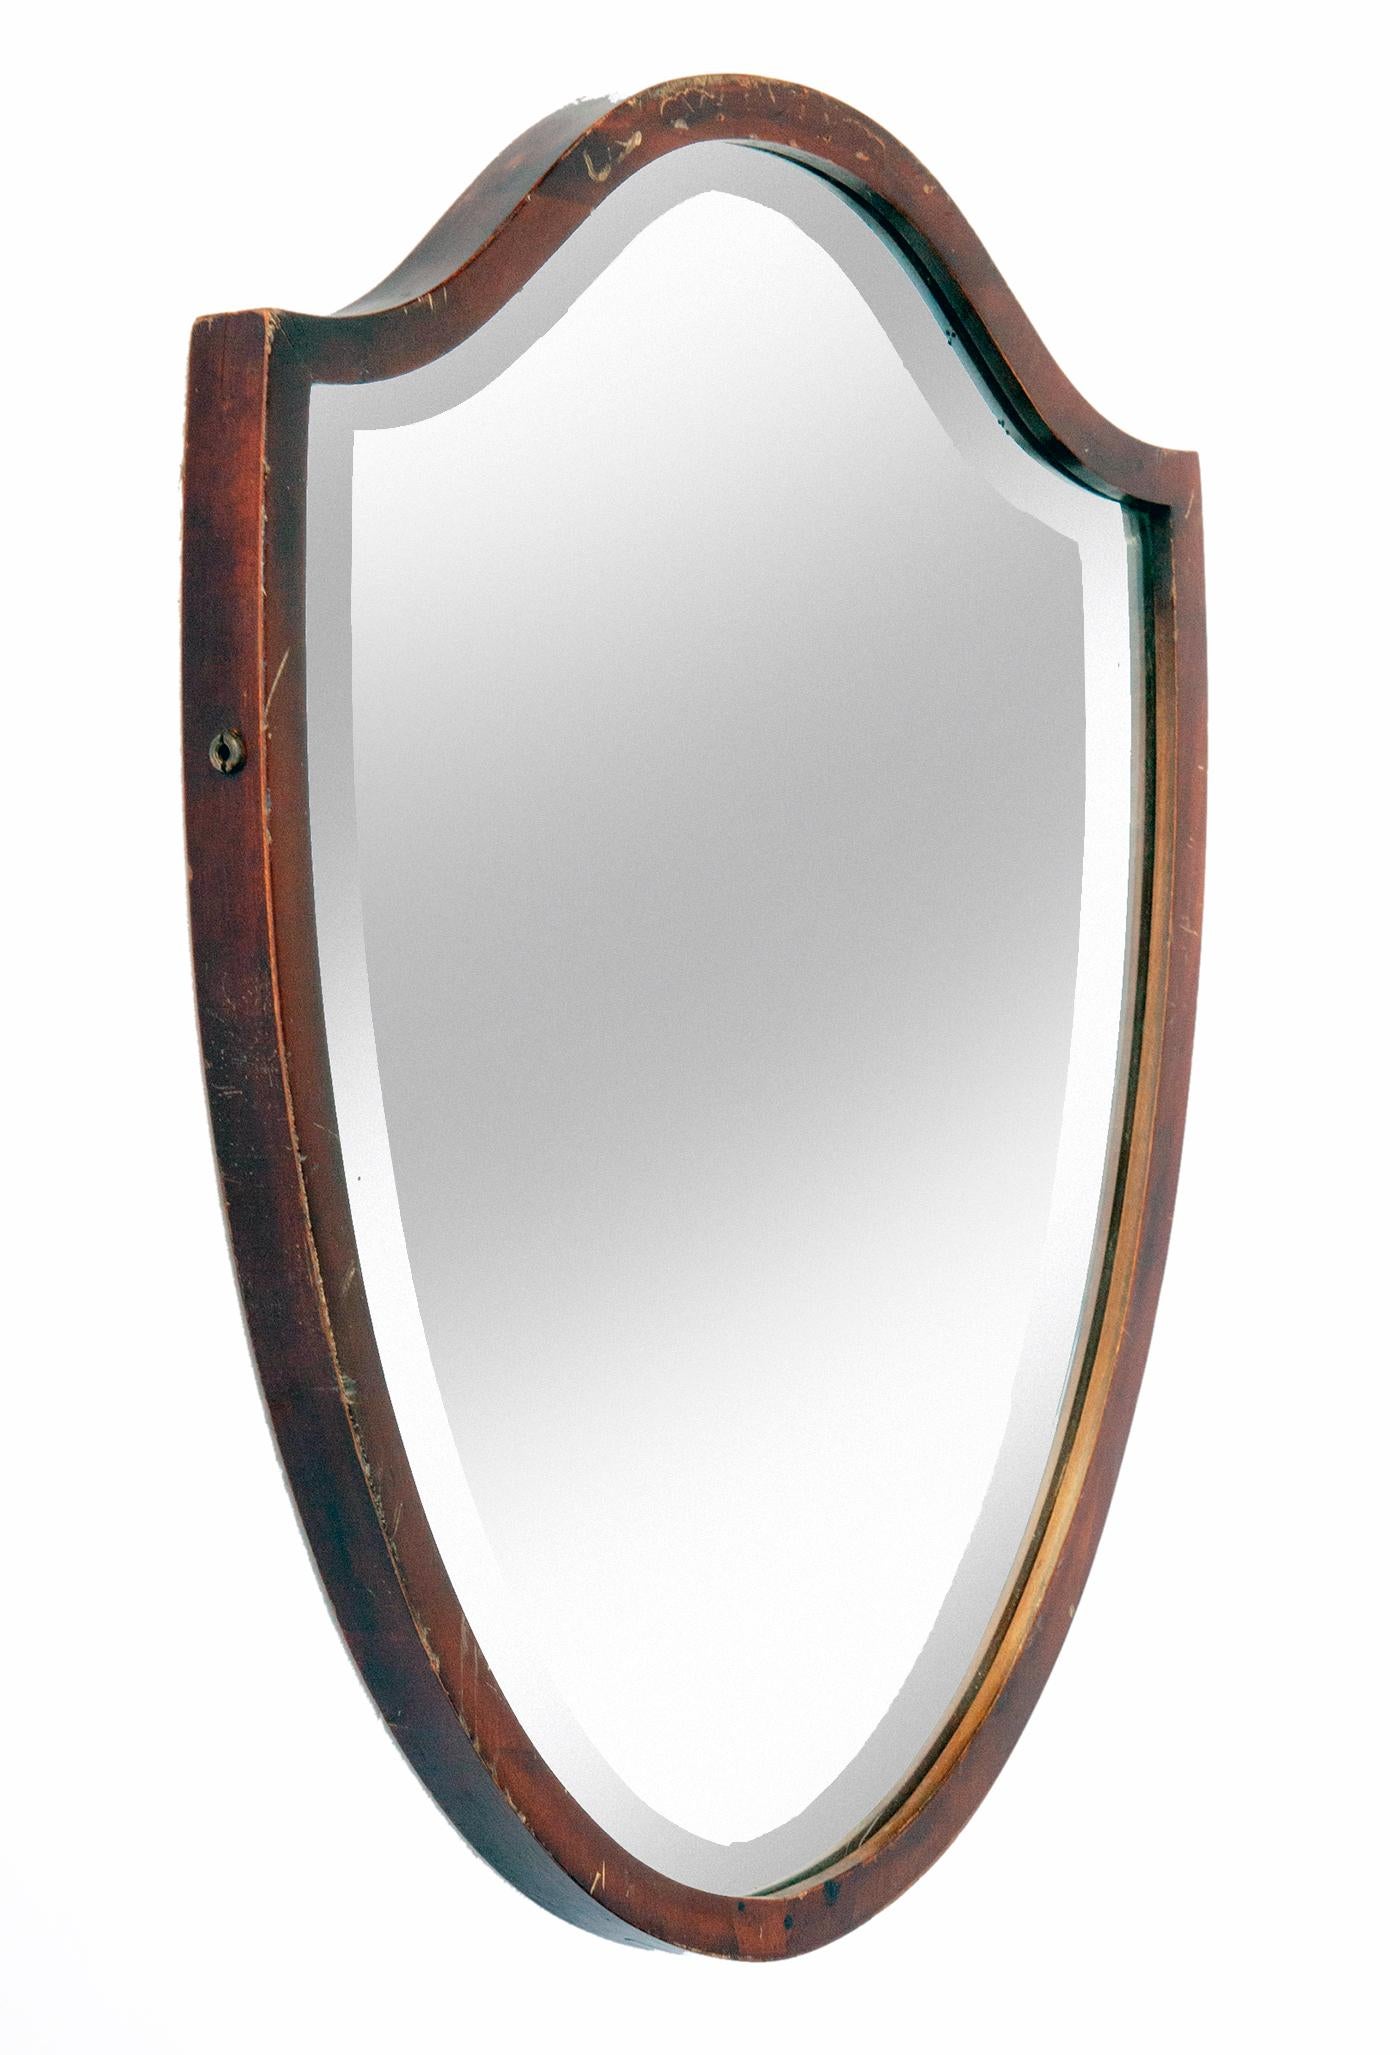 Originally a dressing mirror, this stunning mahogany beveled mirror has an very interesting shape & has a solid wood backing.
Wired to hang vertically.